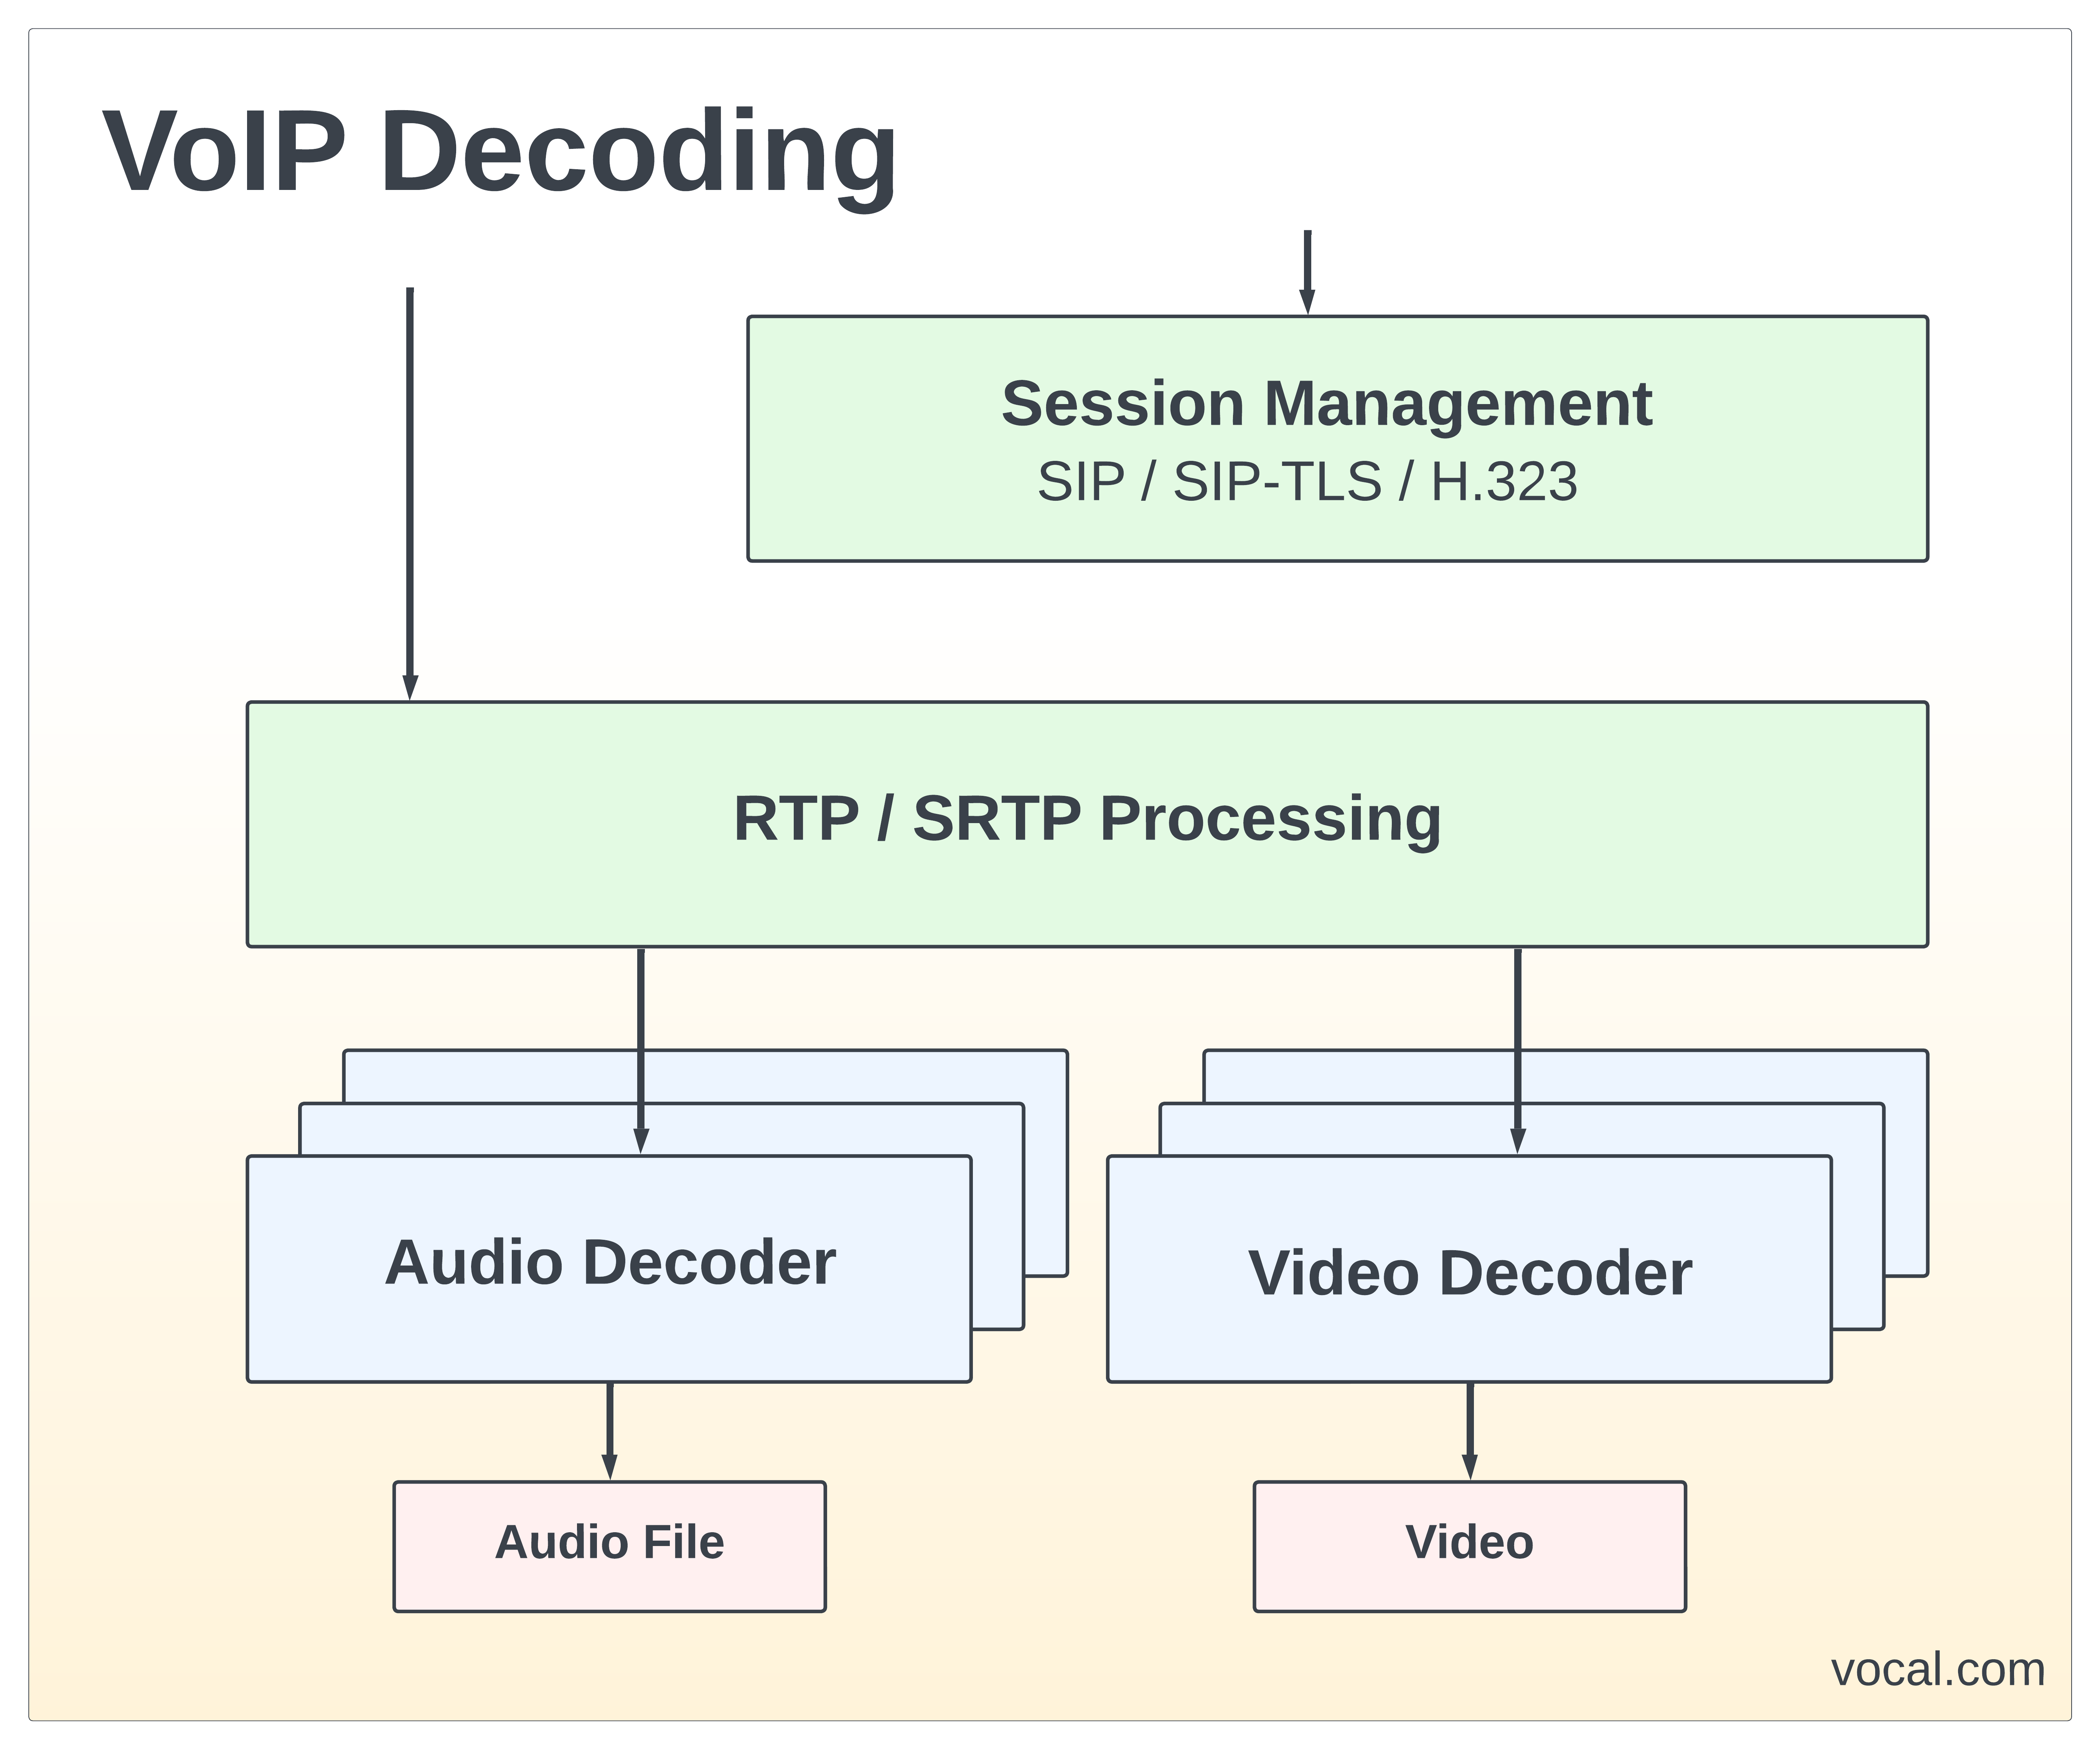 VoIP Decoder for VoIP Decoding